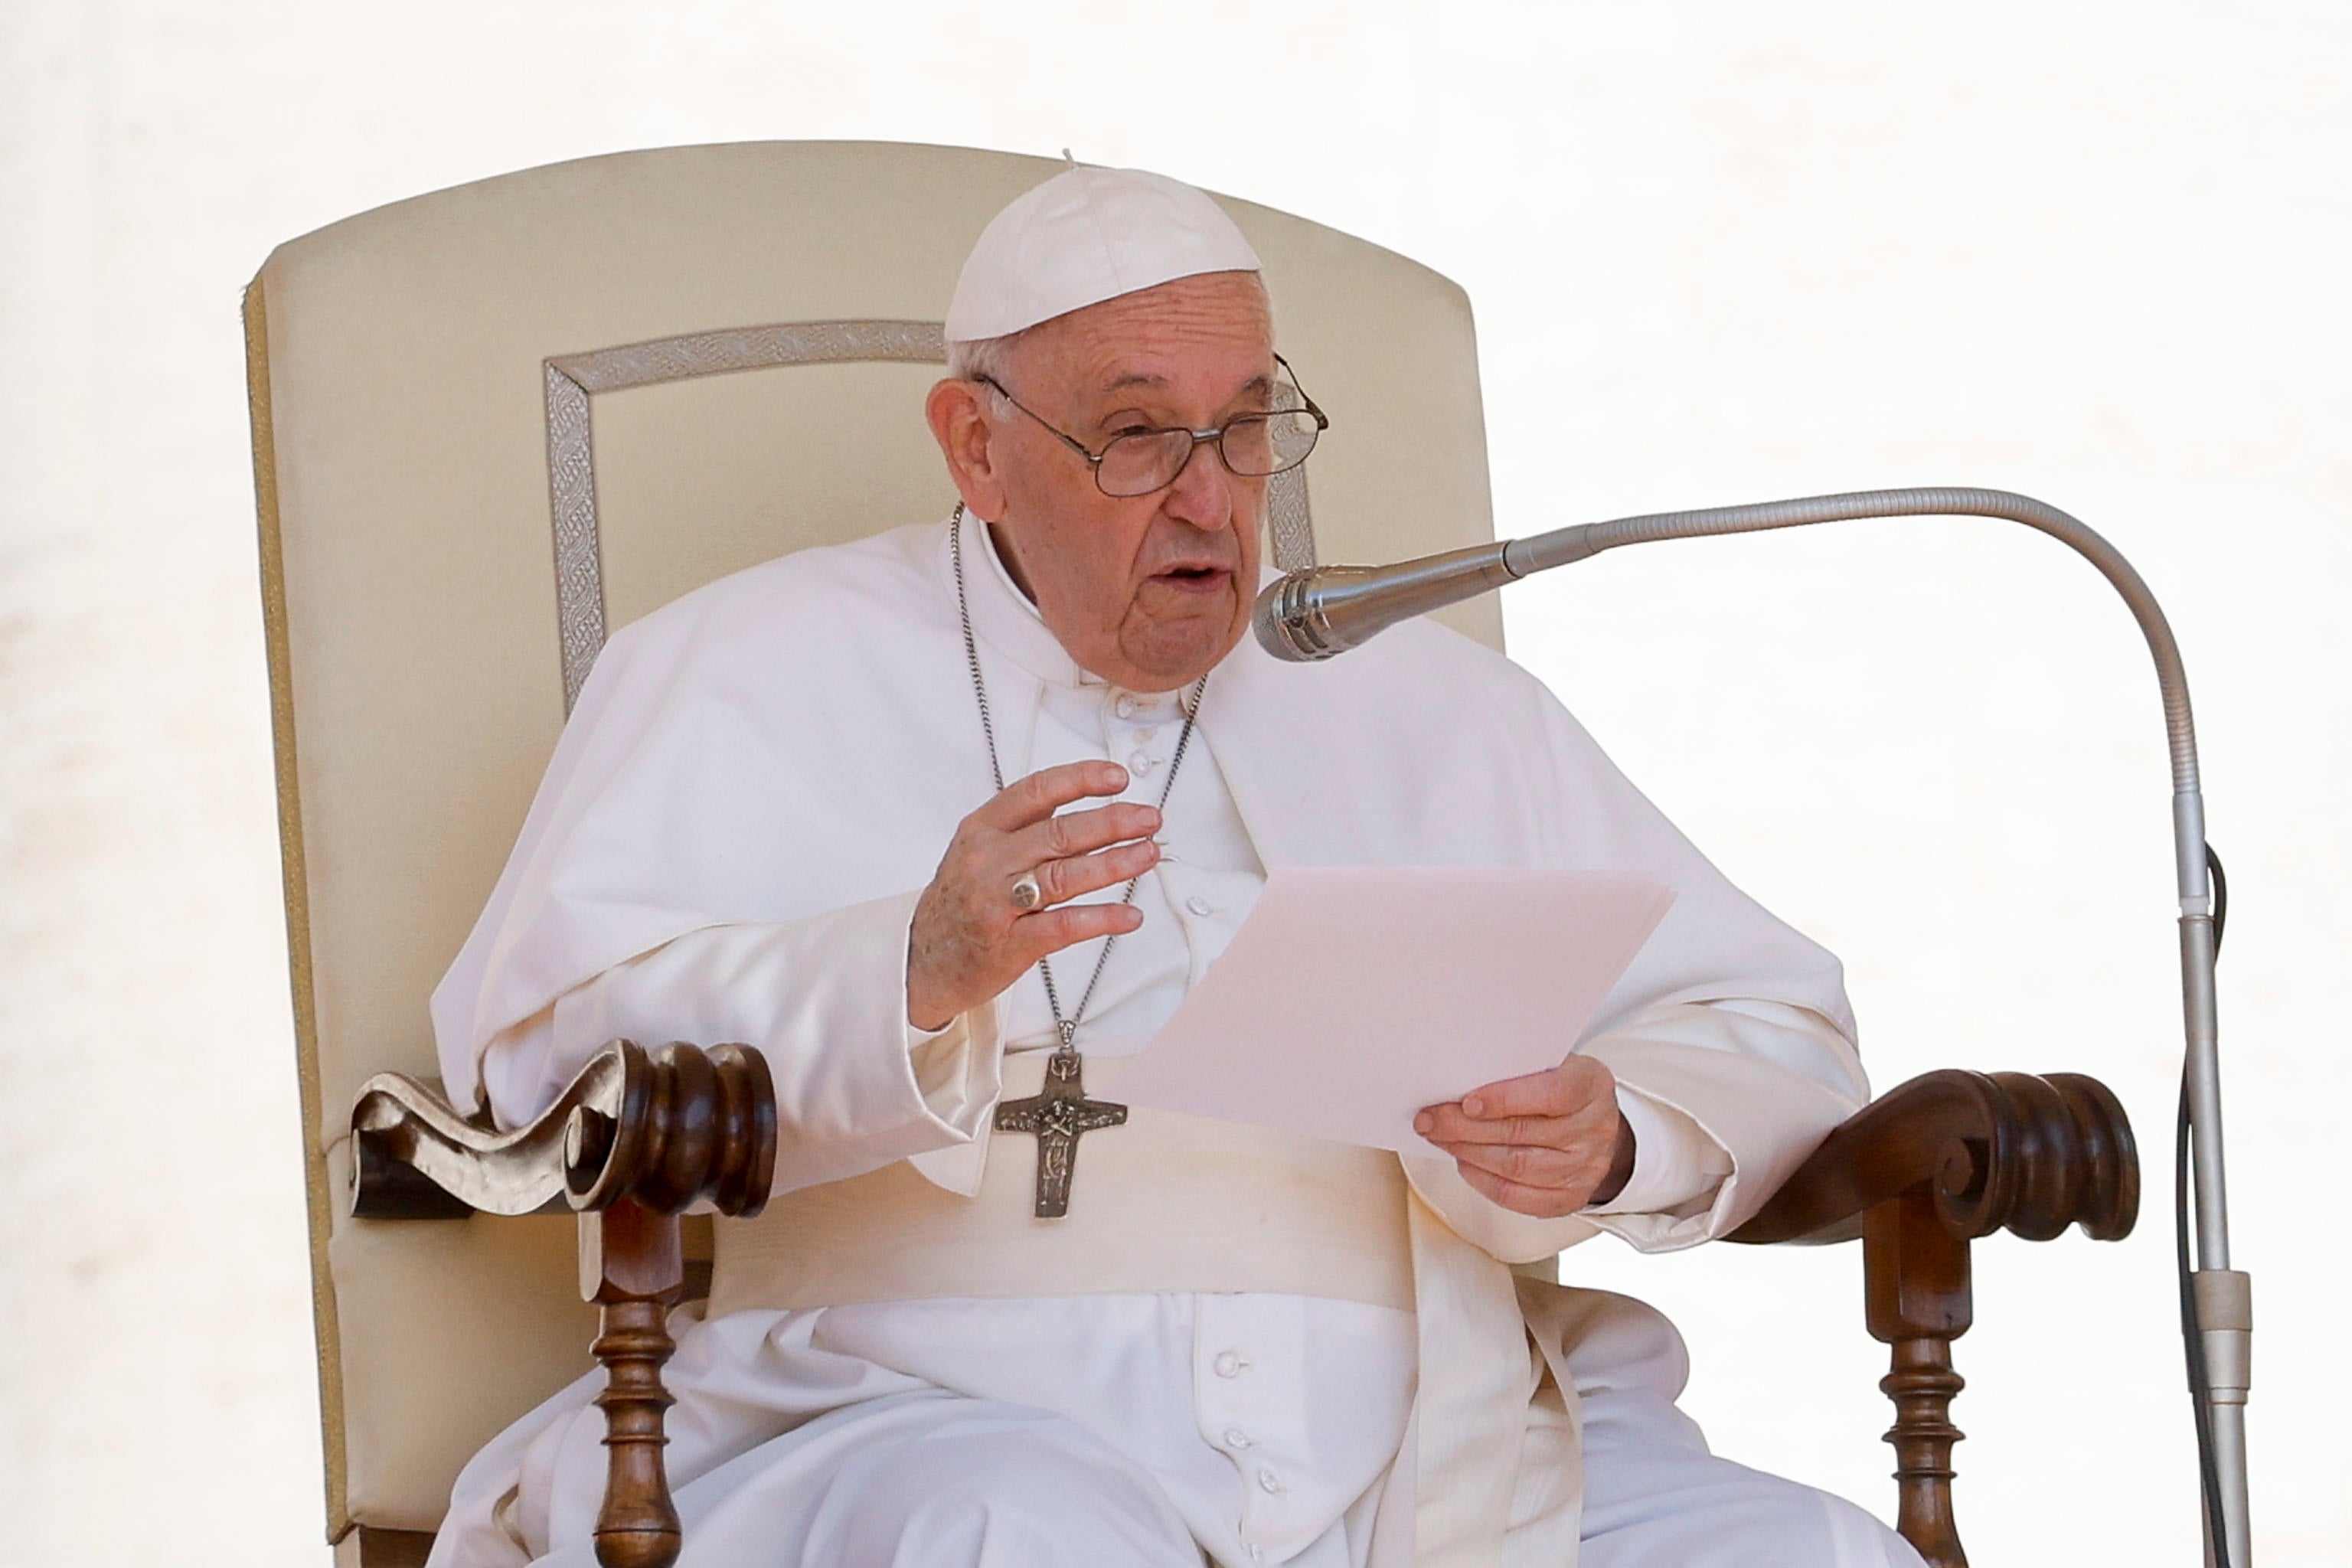 Wheat can’t be ‘weapon of war’, Pope says, urging lifting of Ukraine block